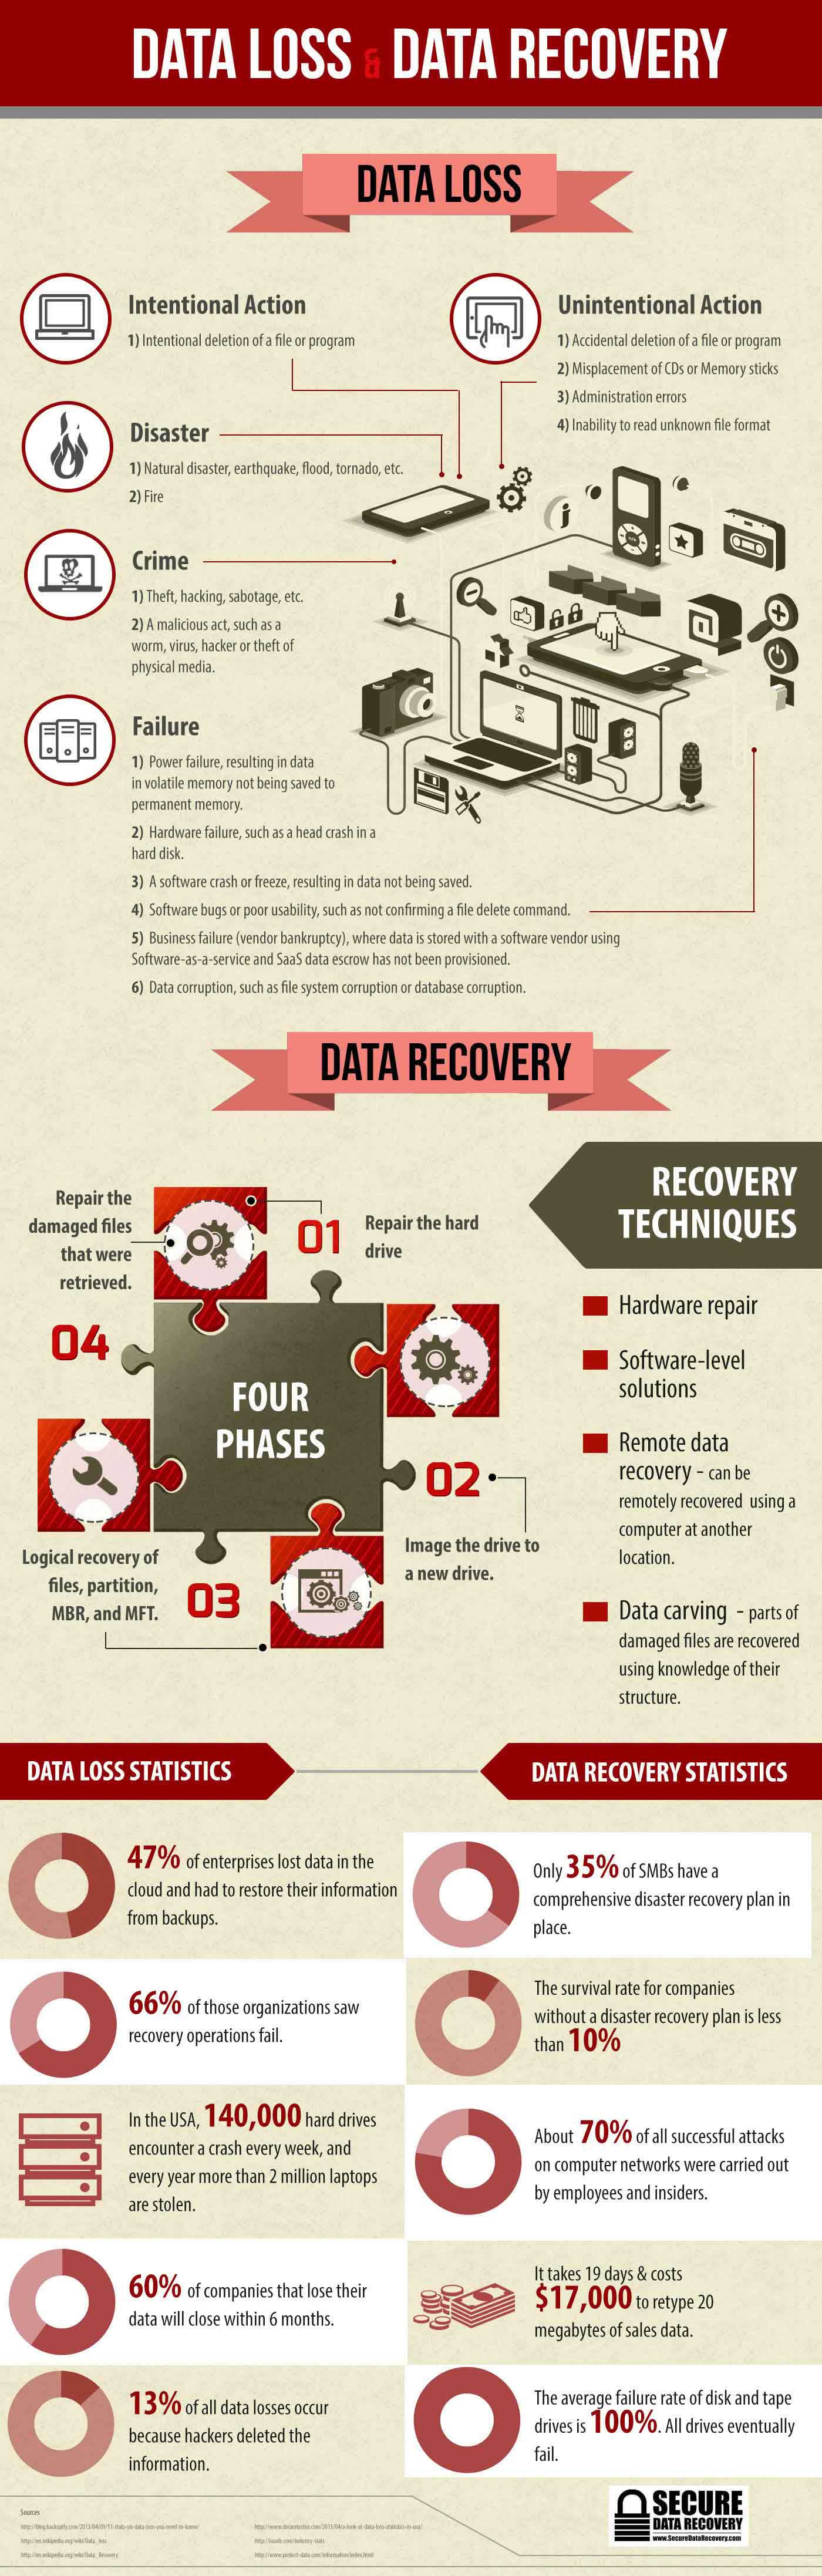 Can data always be recovered?